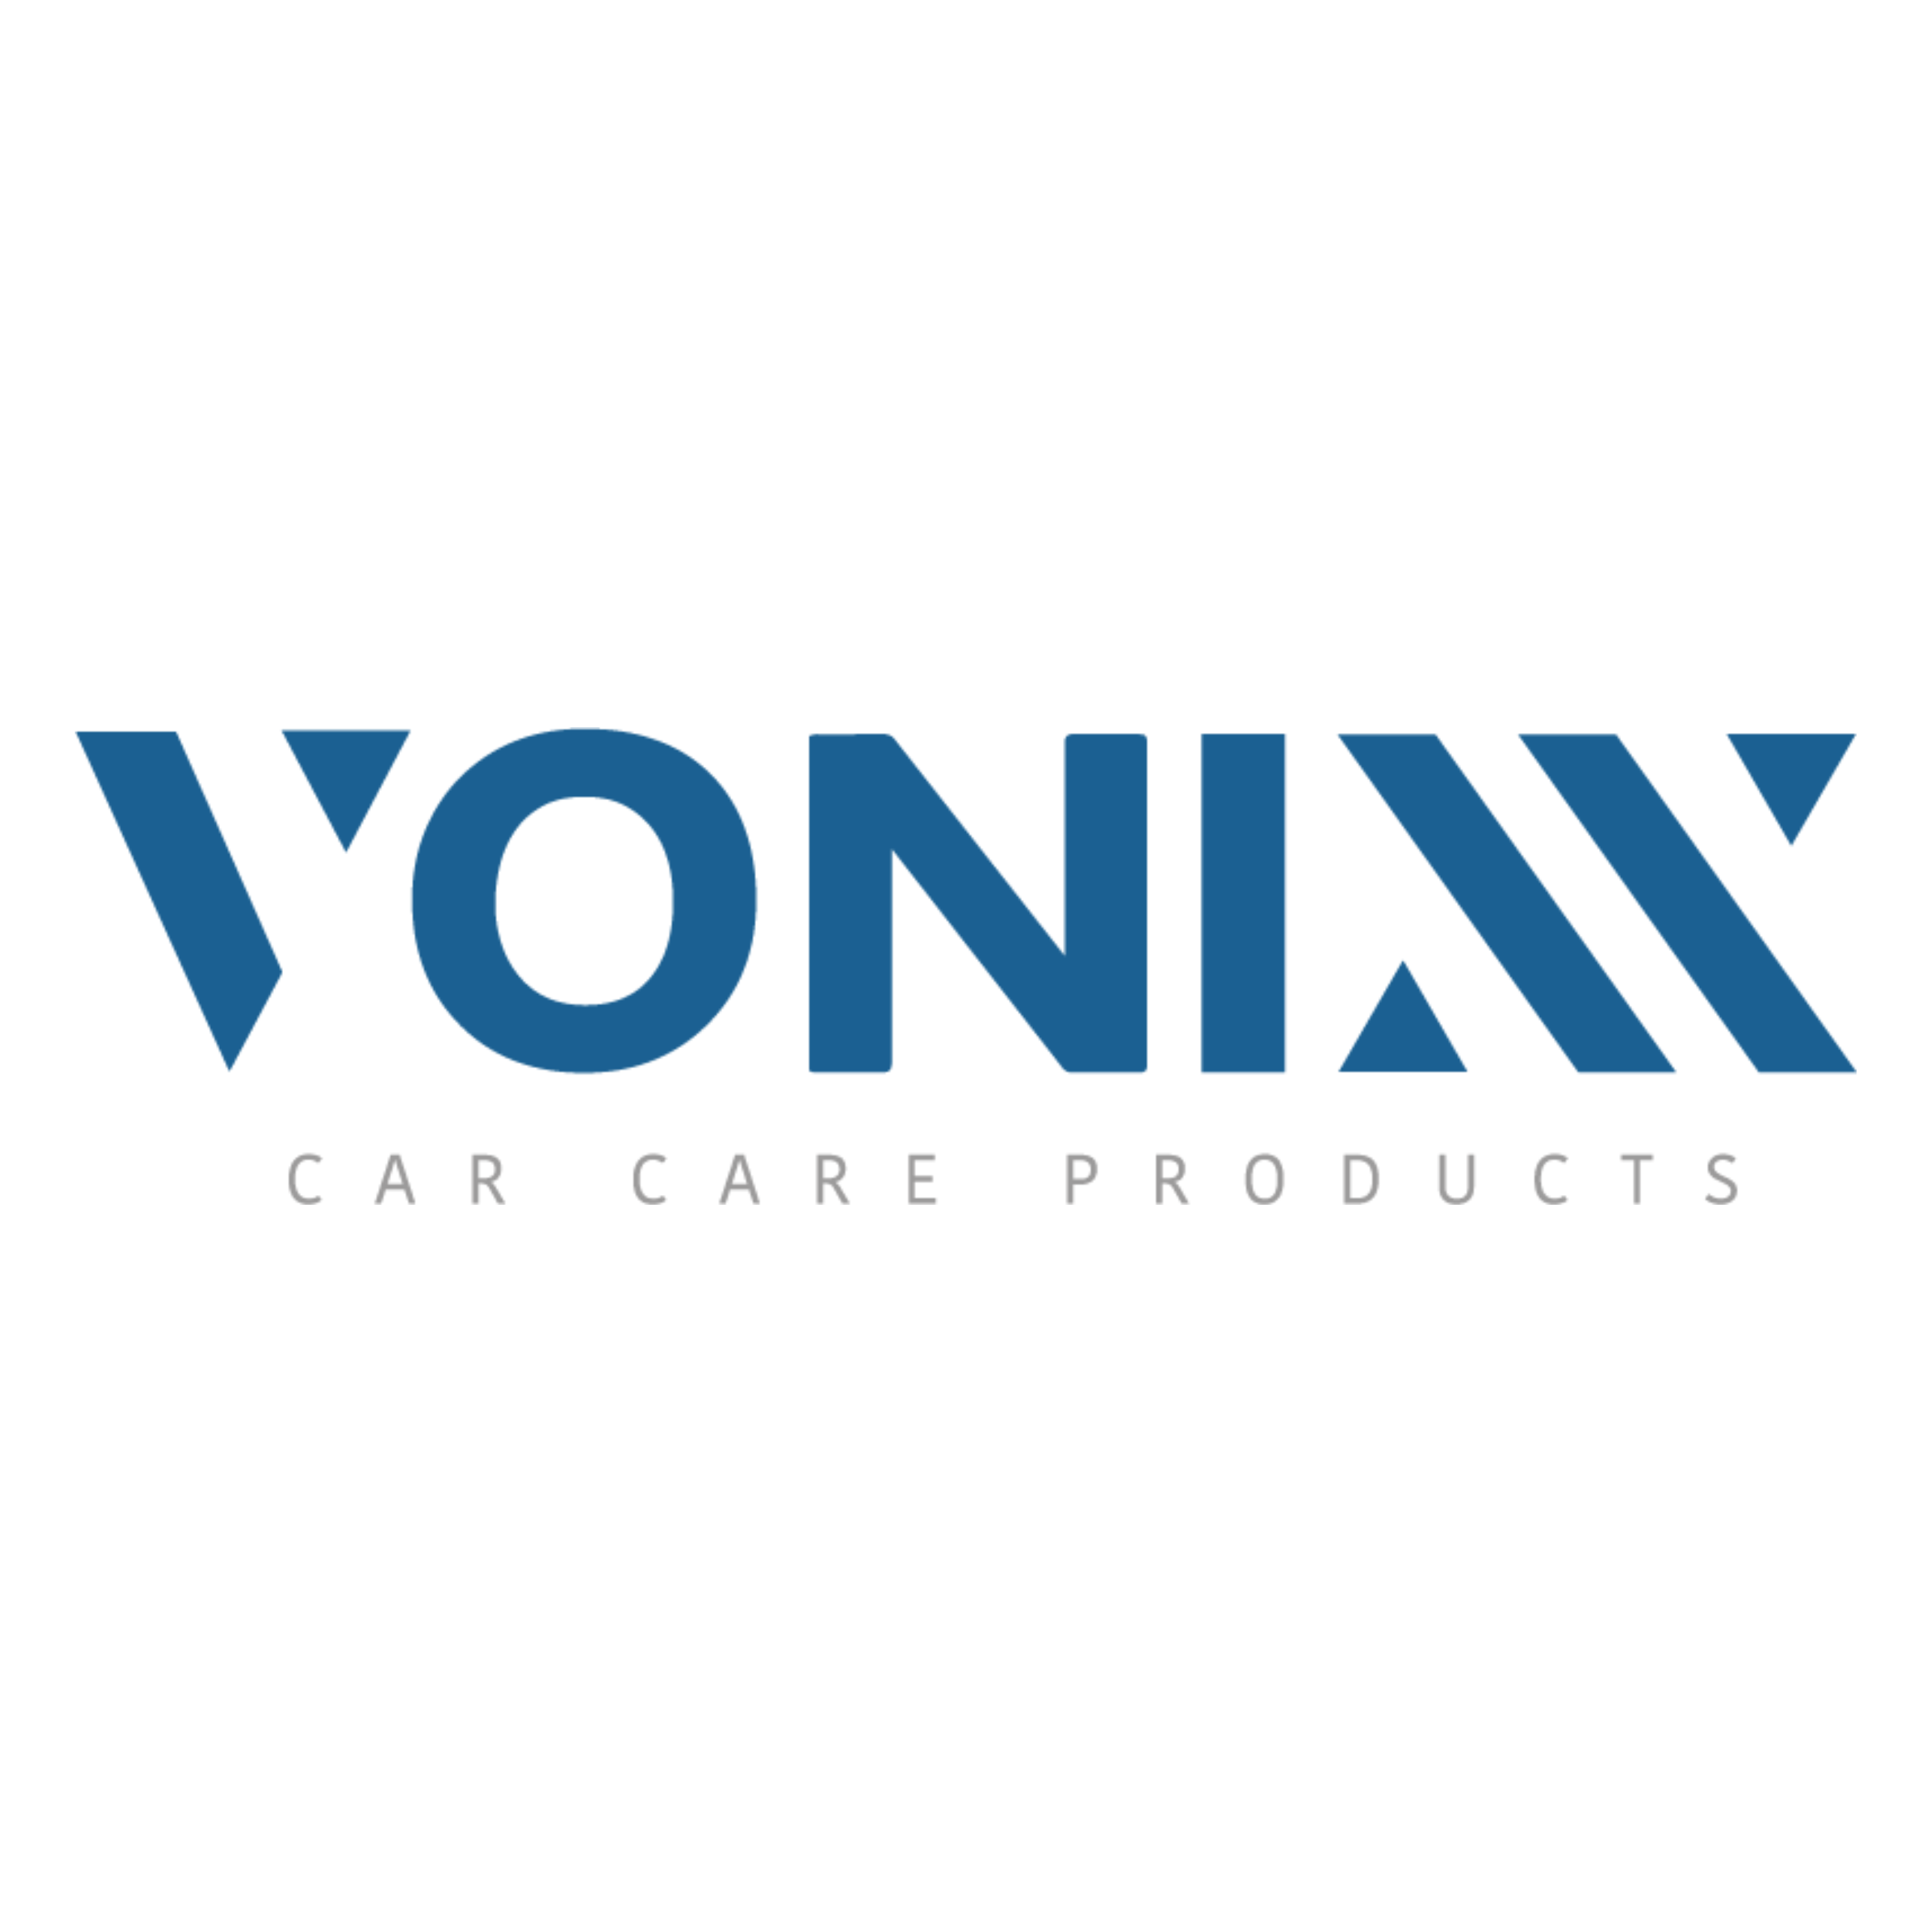 NEW] Vonixx Car Care from Brazil! 